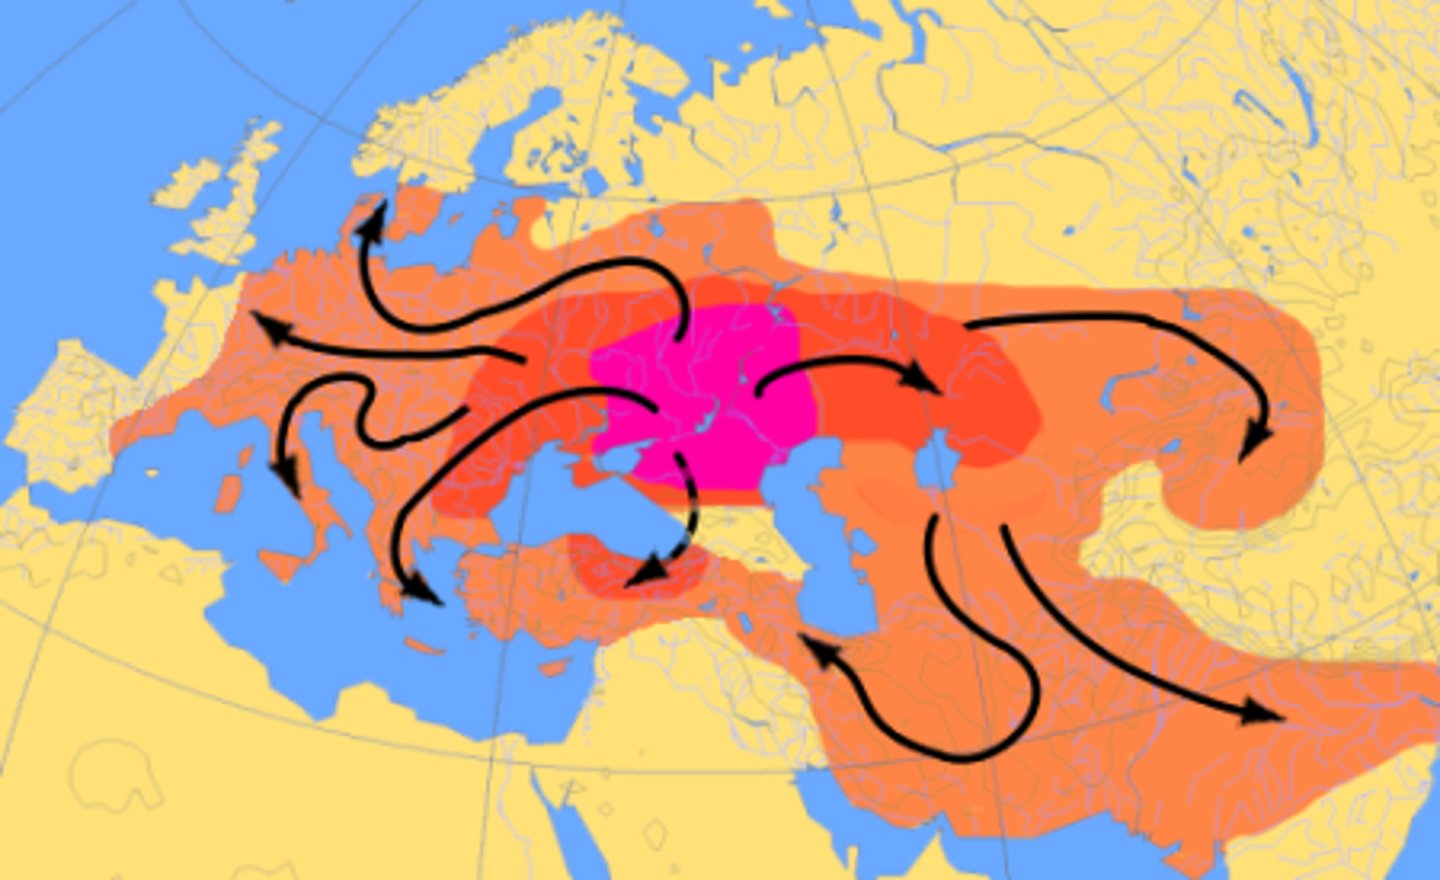 <p>Groups of people who came from the area north of the Caucasus mountains, which are between the Black and Caspian seas. Herded multiple animals. Rode into battle on chariots. The Indo-European language of Sanskrit, by the Aryans, are the basis of many languages today. Often accepted and adapted aspects of technology, religions, and social order of those with whom they came in contact.</p>